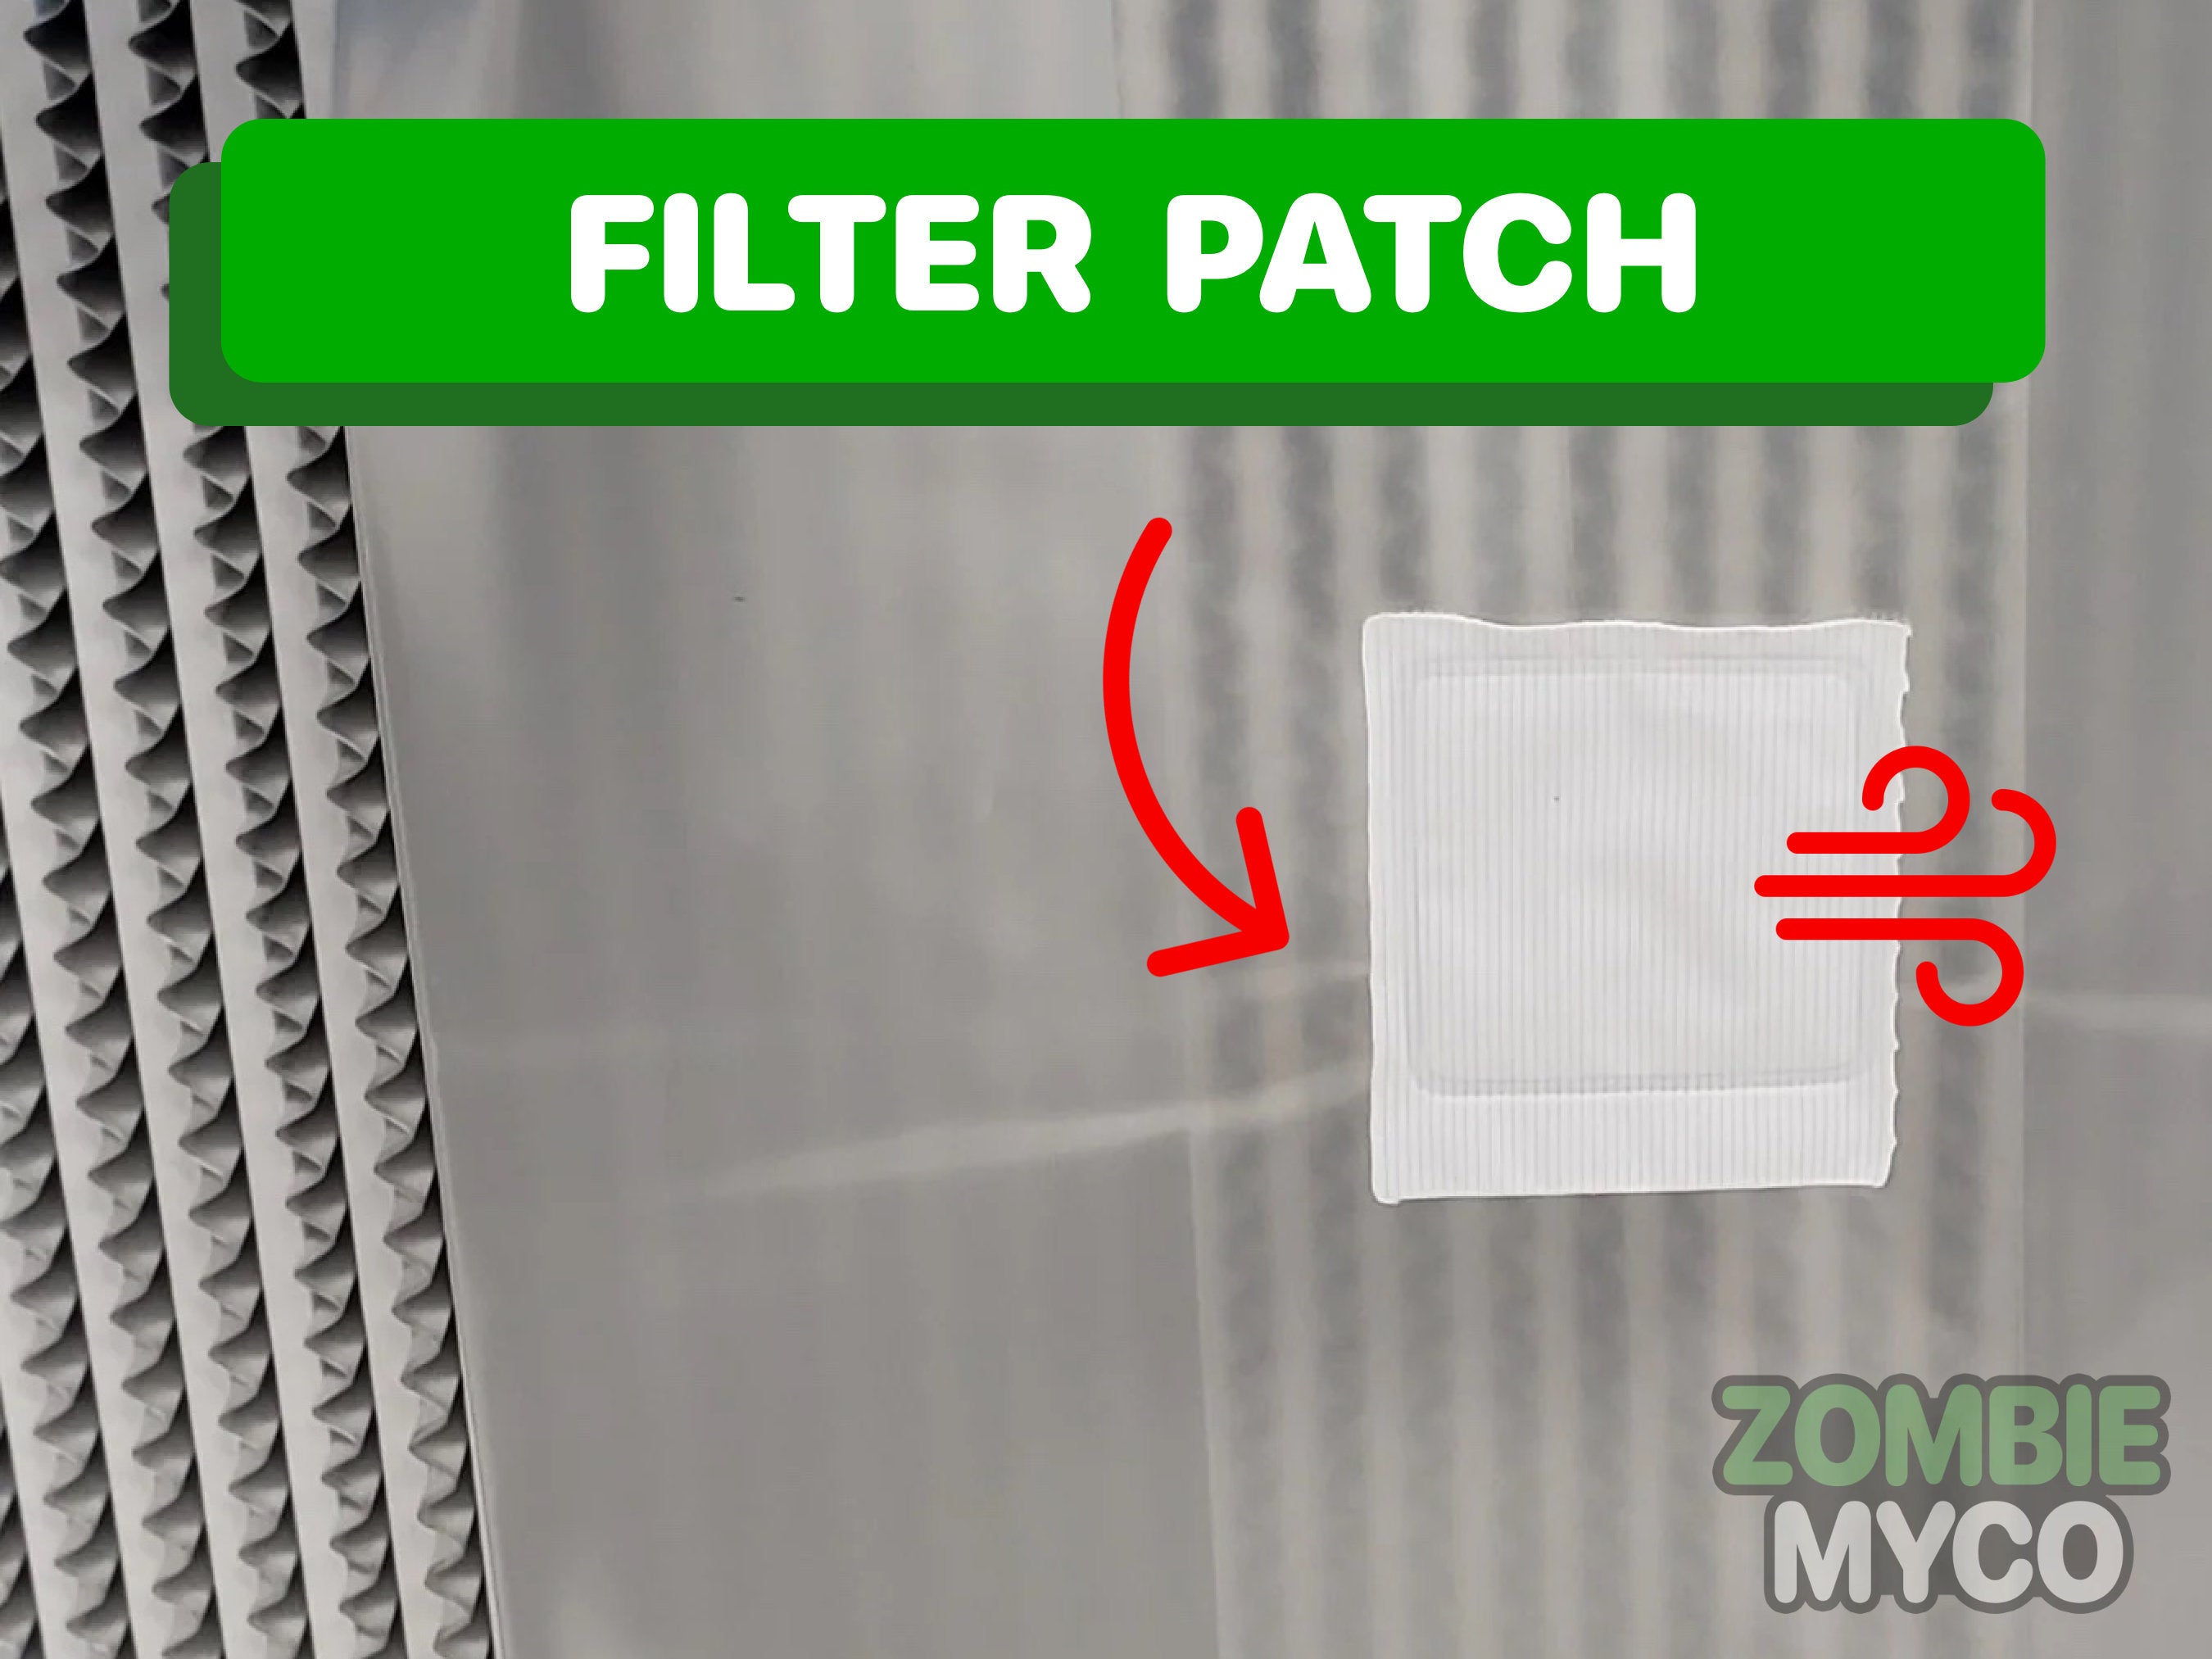 Filter Patch